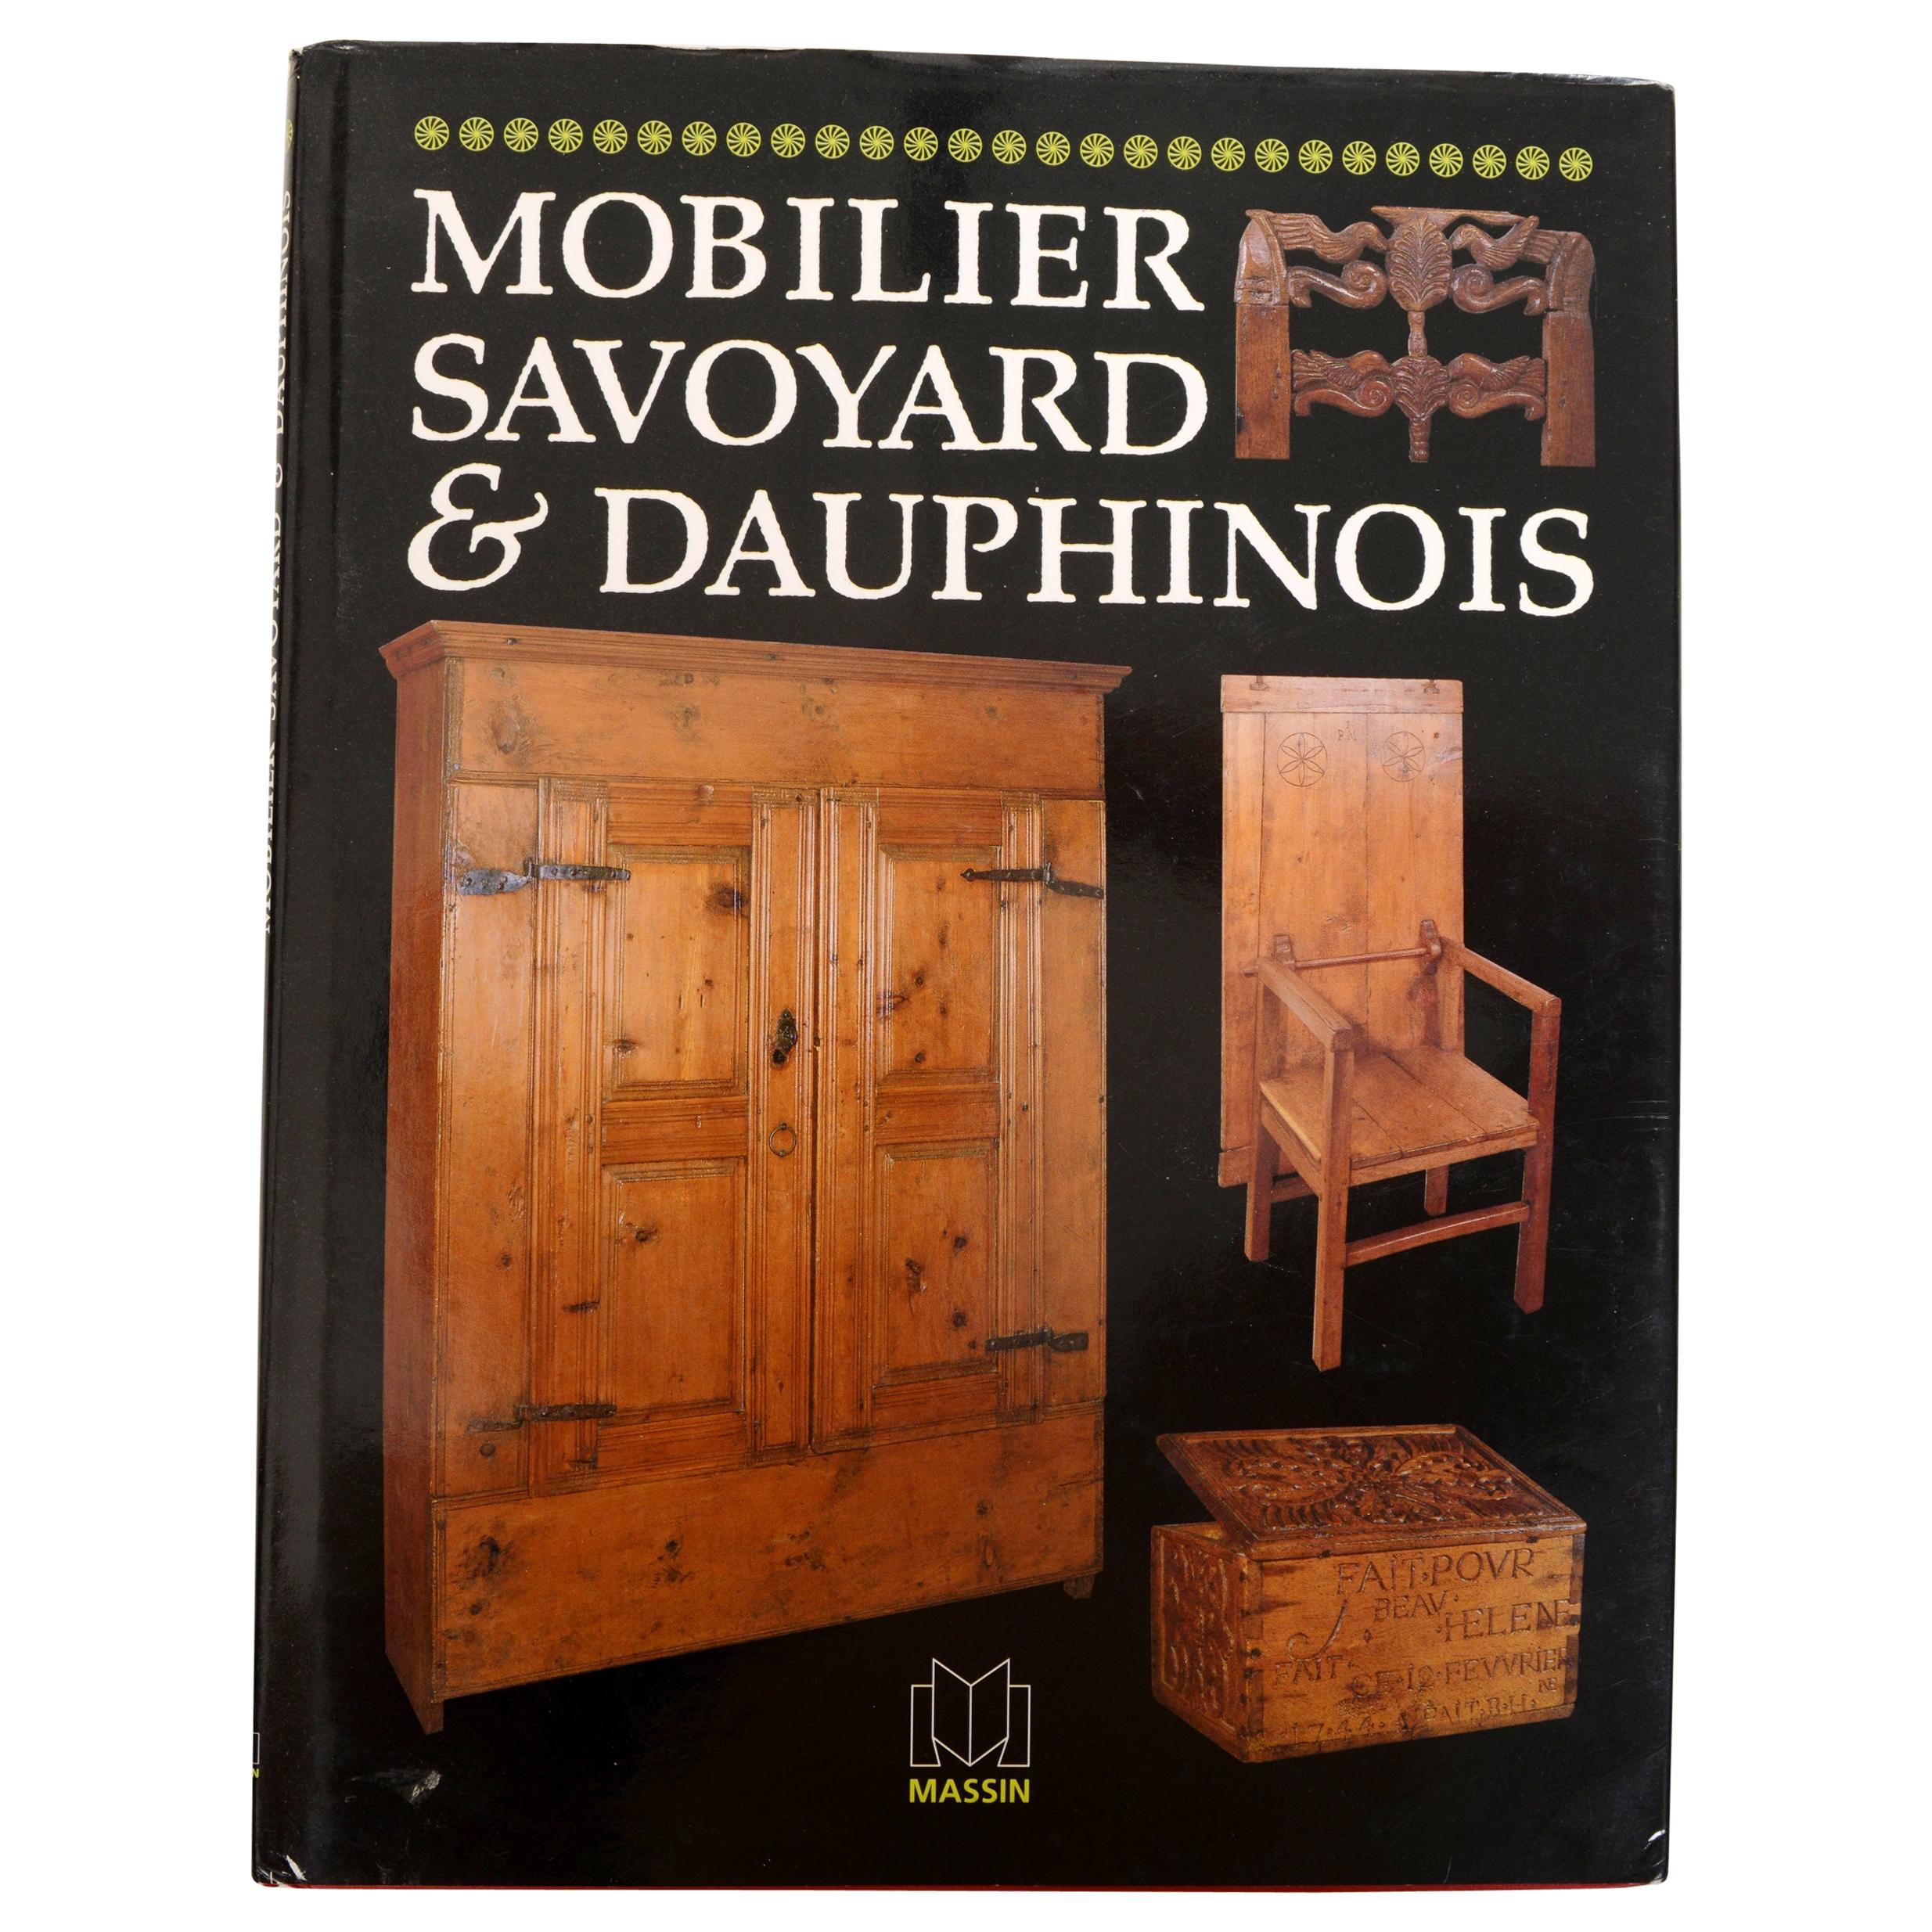 Mobilier Savoyard et Dauphinois by Lucile Olivier, First Edition